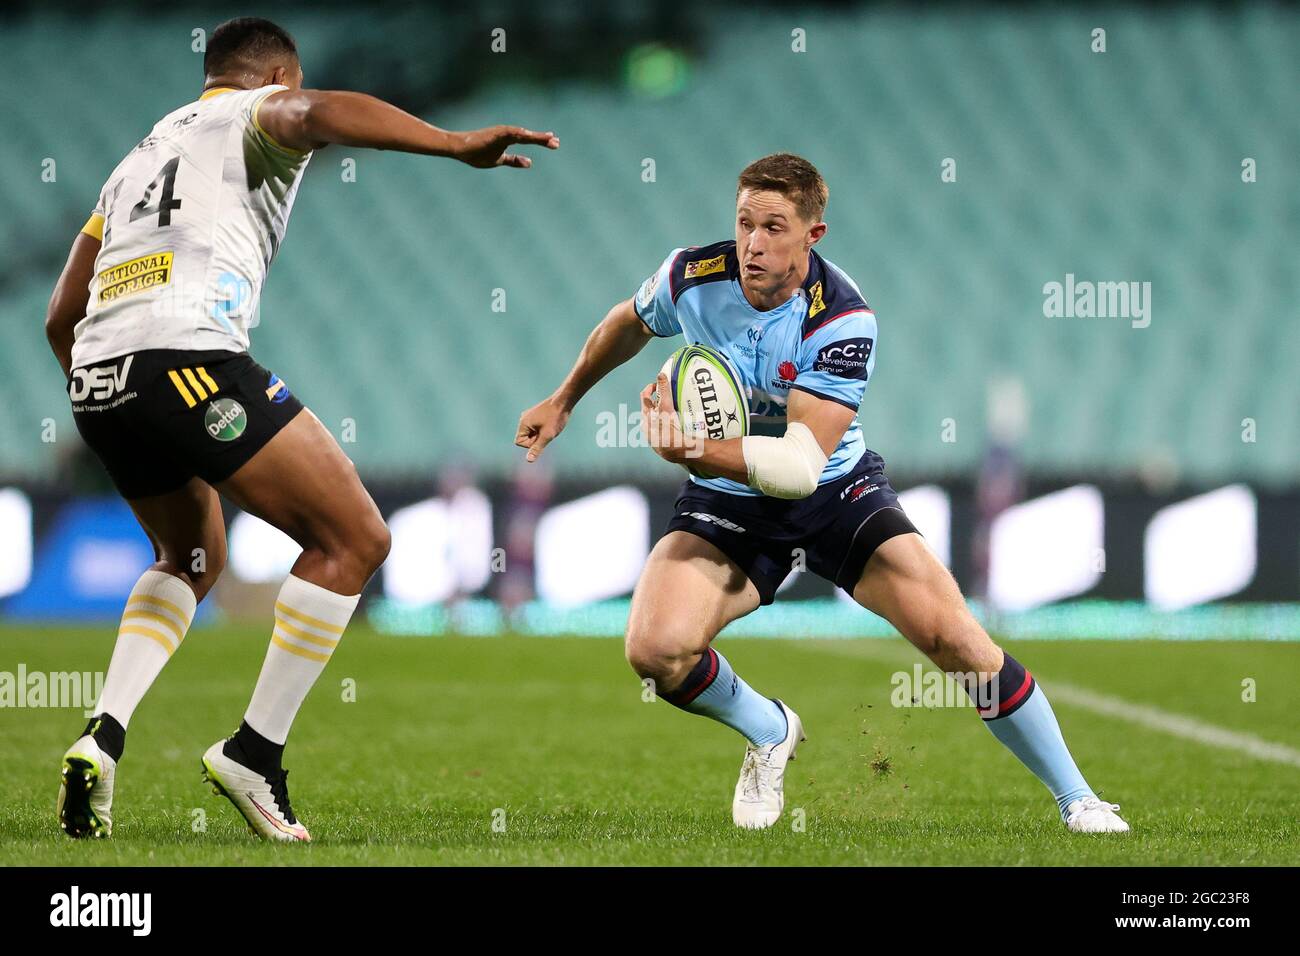 SYDNEY, AUSTRALIA - MAY 14: Alex Newsome of the Waratahs attacks during round one of the Super Rugby Trans Tasman match between the NSW Waratahs and Hurricanes at Sydney Cricket Ground on May 14, 2021 in Sydney, Australia. (Photo by Pete Dovgan/Speed Media/Icon Sportswire). Credit: Pete Dovgan/Speed Media/Alamy Live News Stock Photo